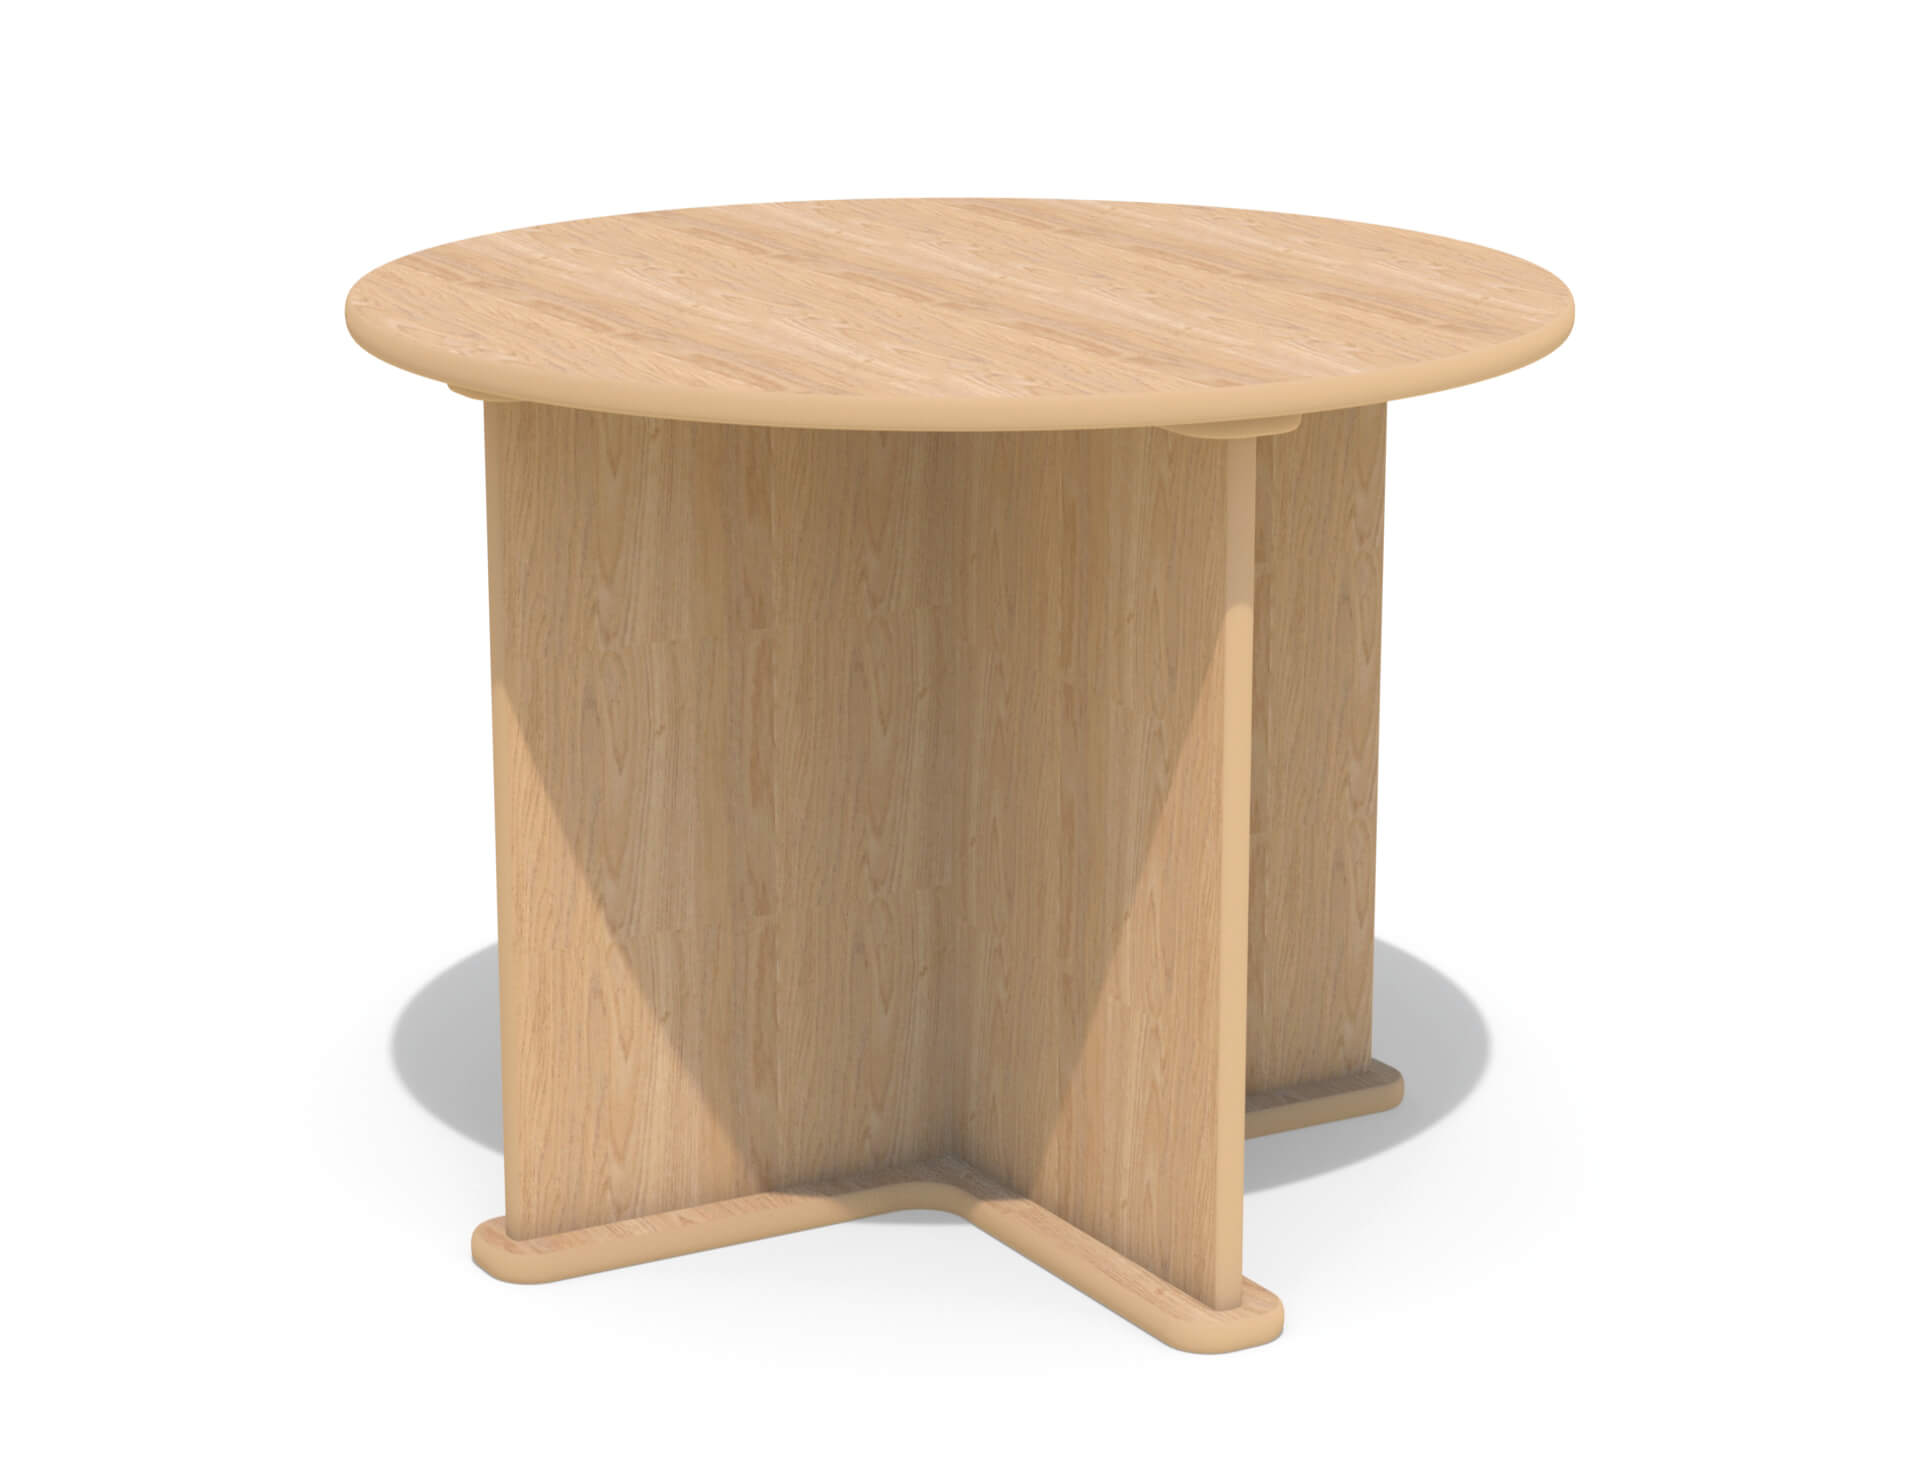 Indistruct Circular Dining Table